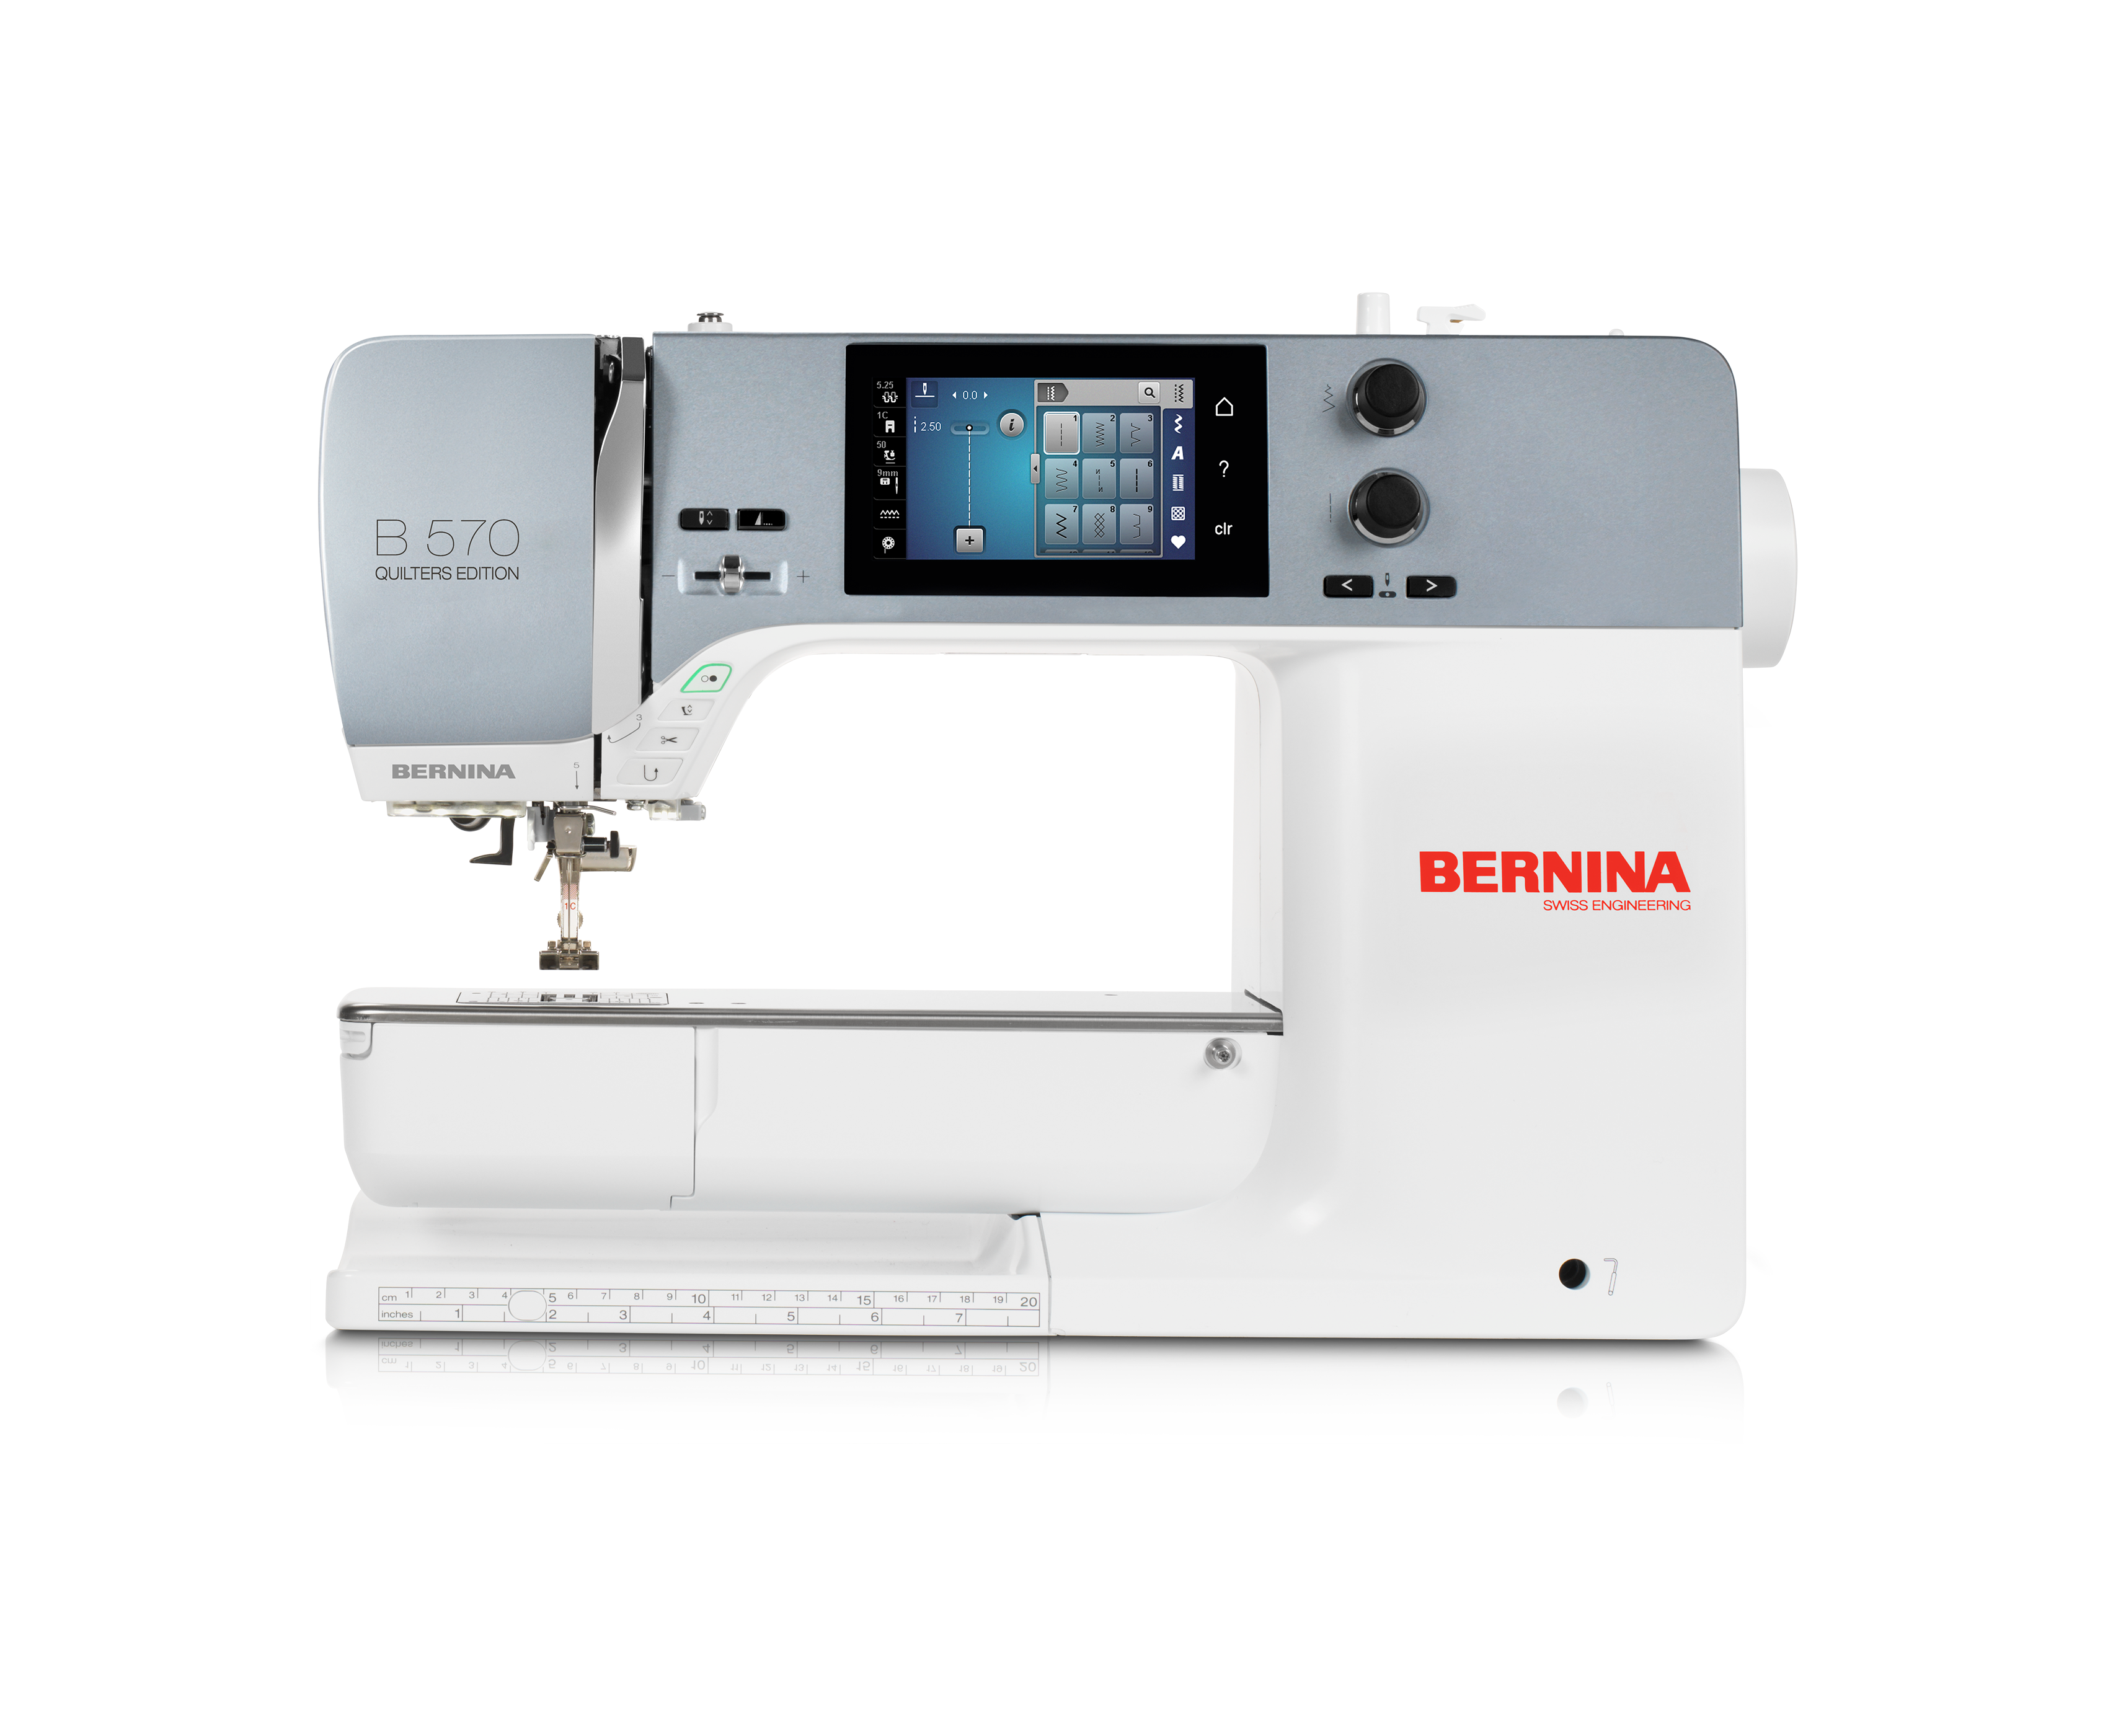 BERNINA 570 Quilter's Edition Sewing and Embroidery Machine